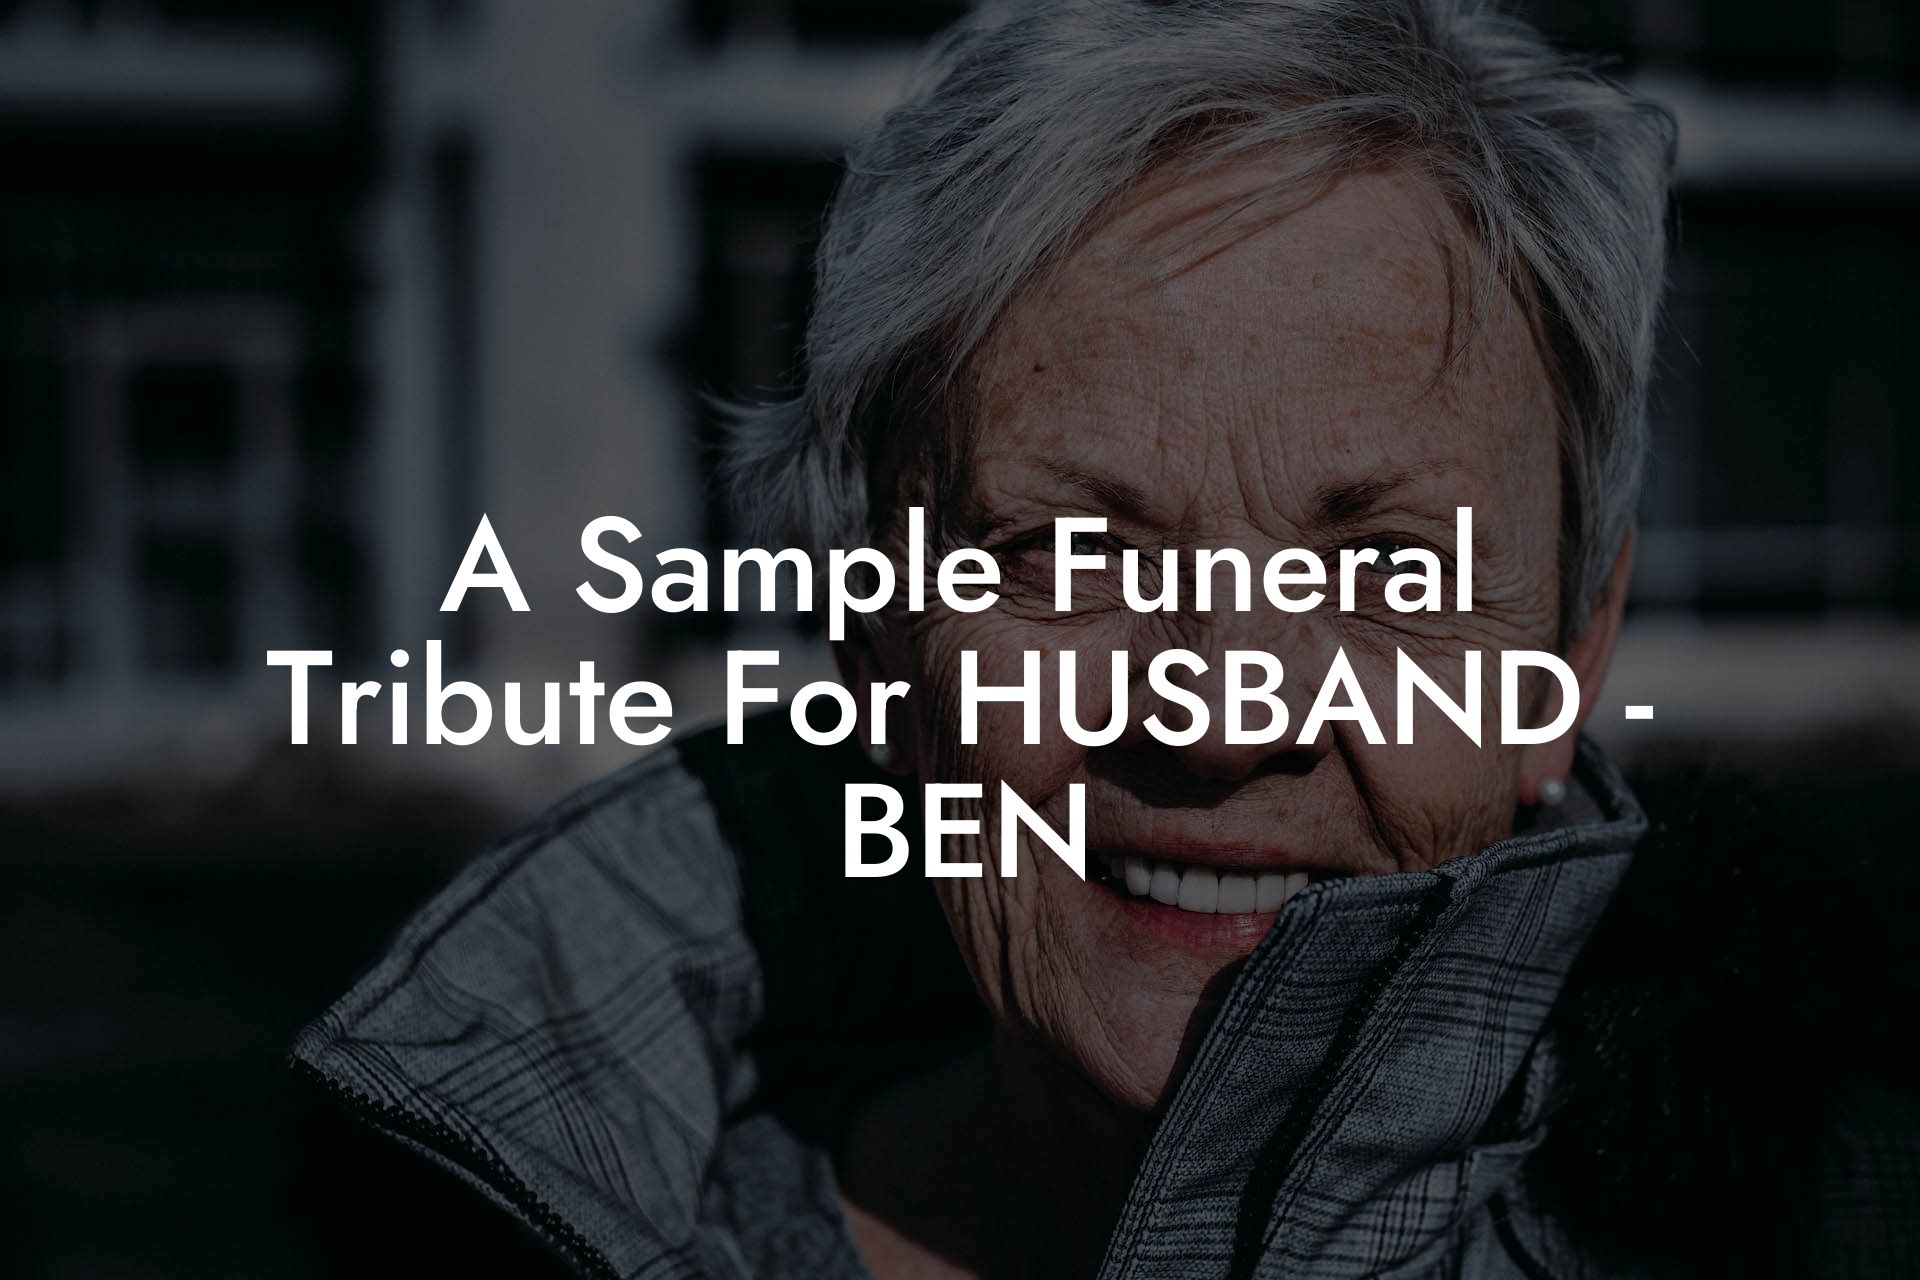 A Sample Funeral Tribute For HUSBAND - BEN